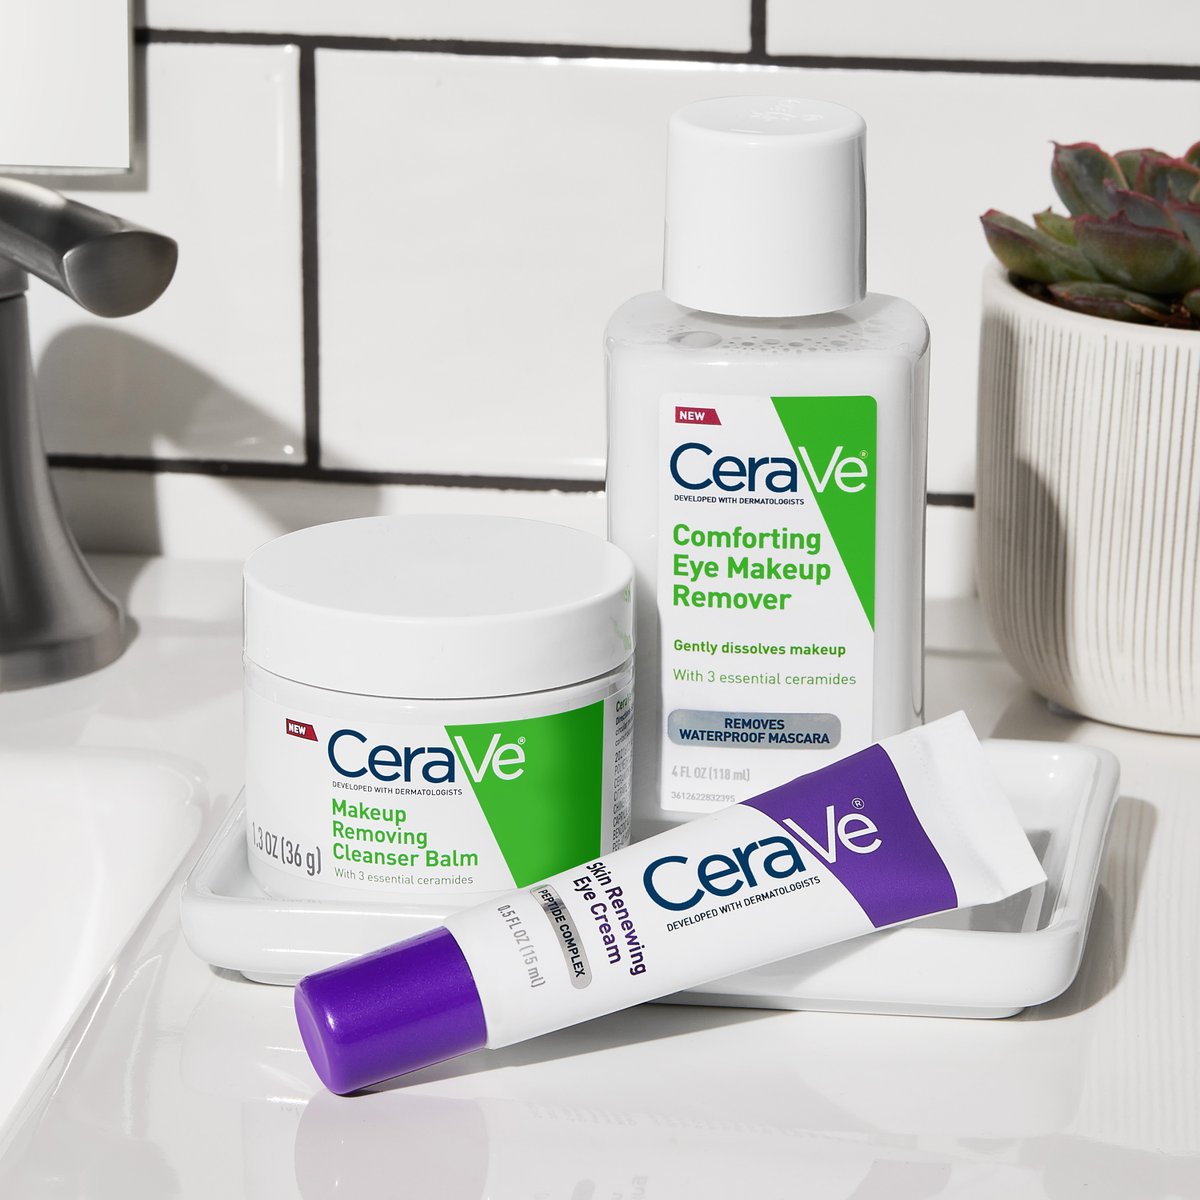 Remove longwear makeup, dirt & oil - even waterproof mascara with: 💙 Makeup Removing Cleanser Balm 💙 Comforting Eye Makeup Remover Reduce the look of fine lines, wrinkles, puffiness, and dark circles with: 💙 Skin Renewing Eye Cream #CeraVe #DevelopedWithDerms